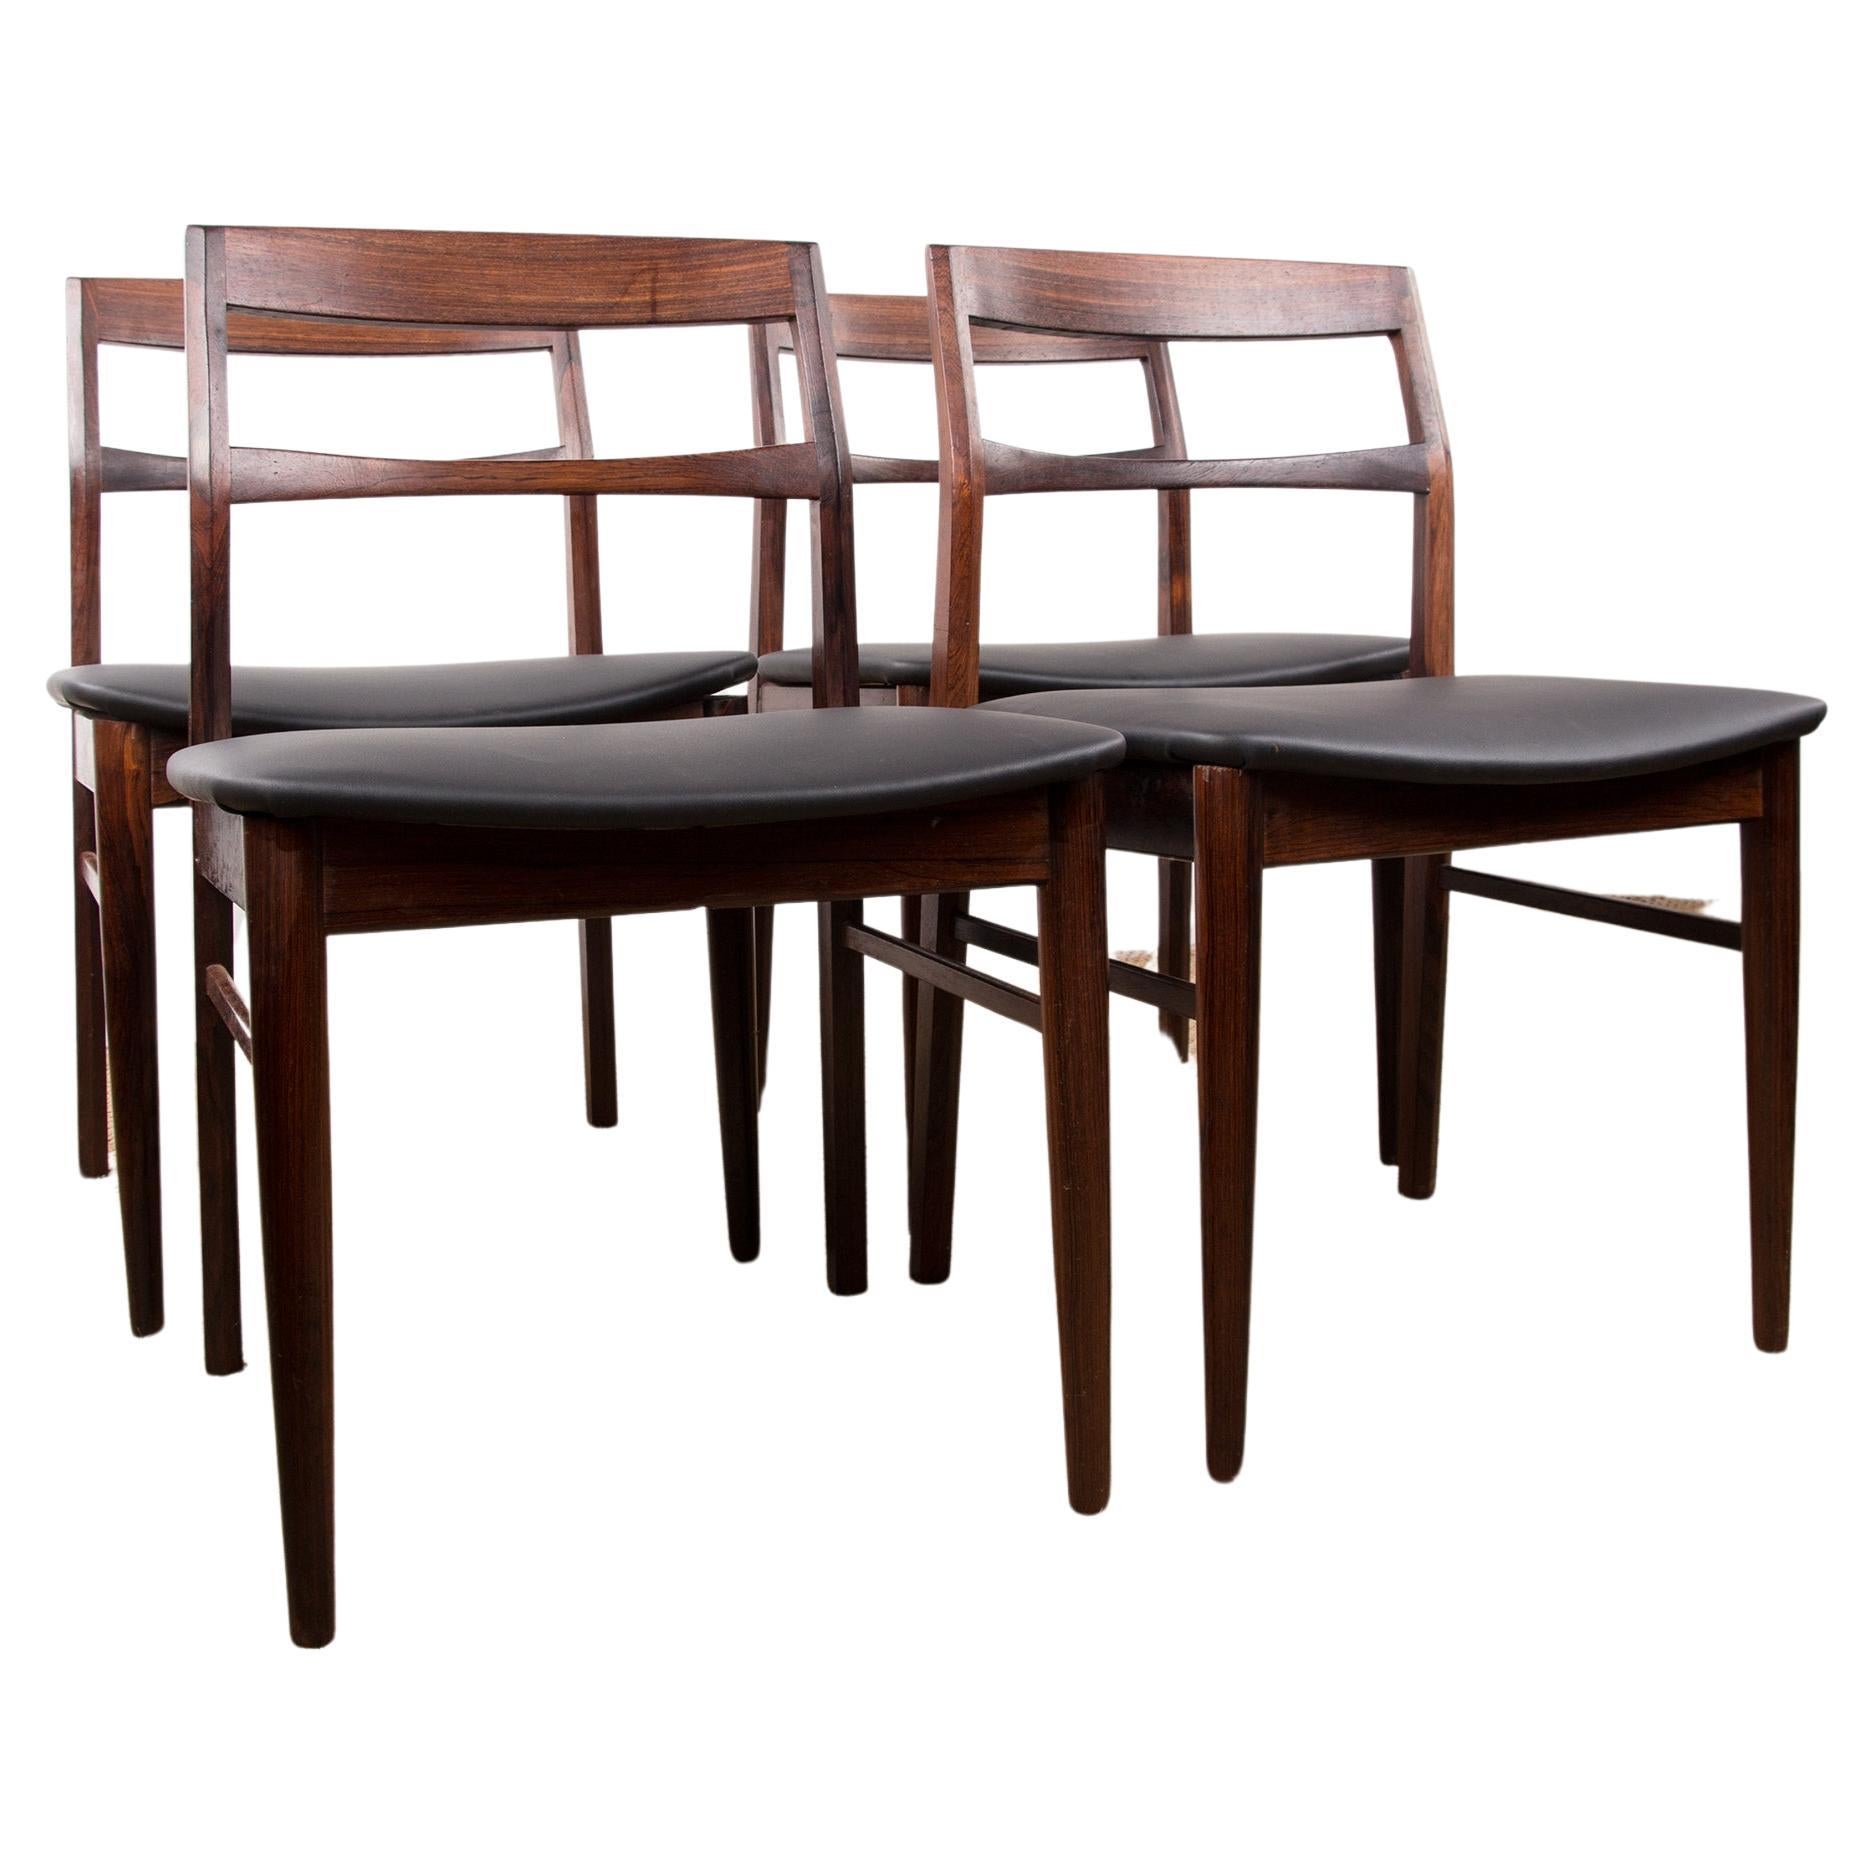 Set of 4 Danish chairs in Rosewood and Skai new by Henning Kjaernulf for Vejl For Sale